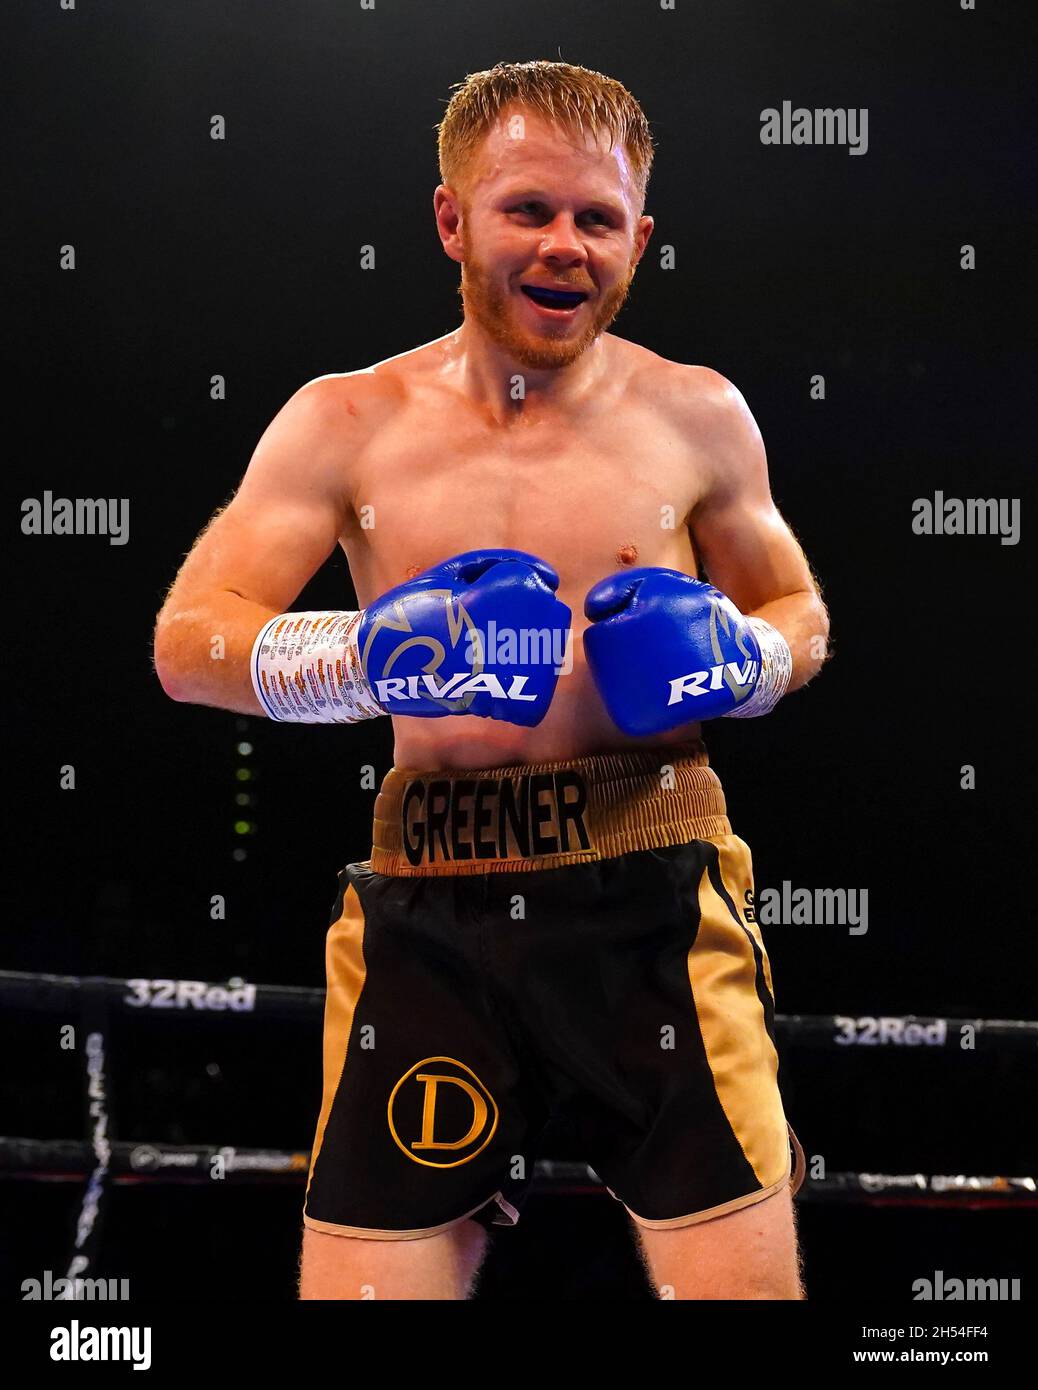 Stu Greener in action against Eithan James during the Super-Lightweight Contest at Utilita Arena, Birmingham. Picture date: Saturday November 6, 2021. Stock Photo